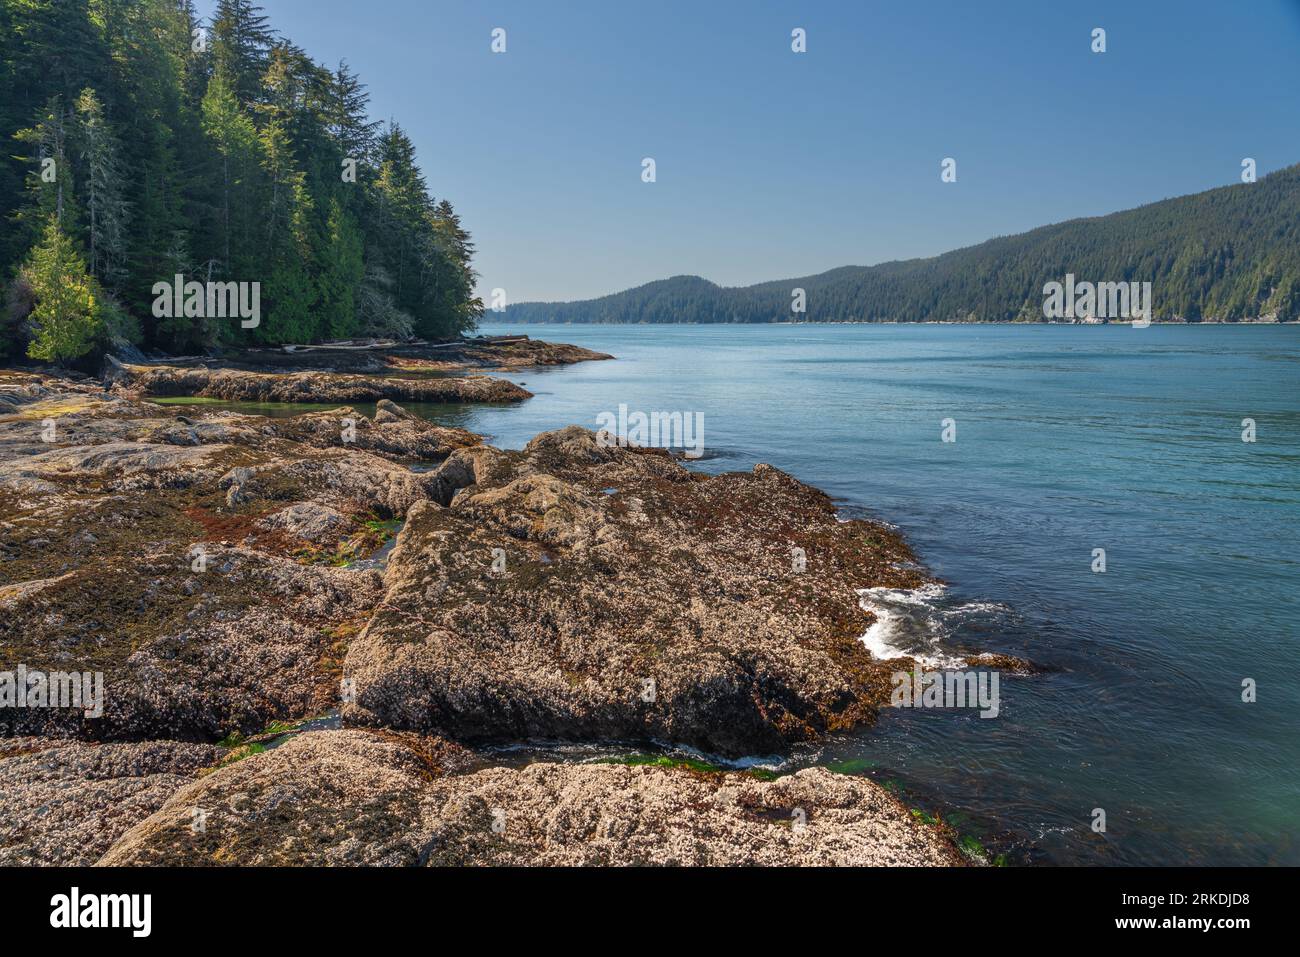 A rocky tidal inlet in the coastal forest near Port Renfrew, British Columbia, Canada. Stock Photo